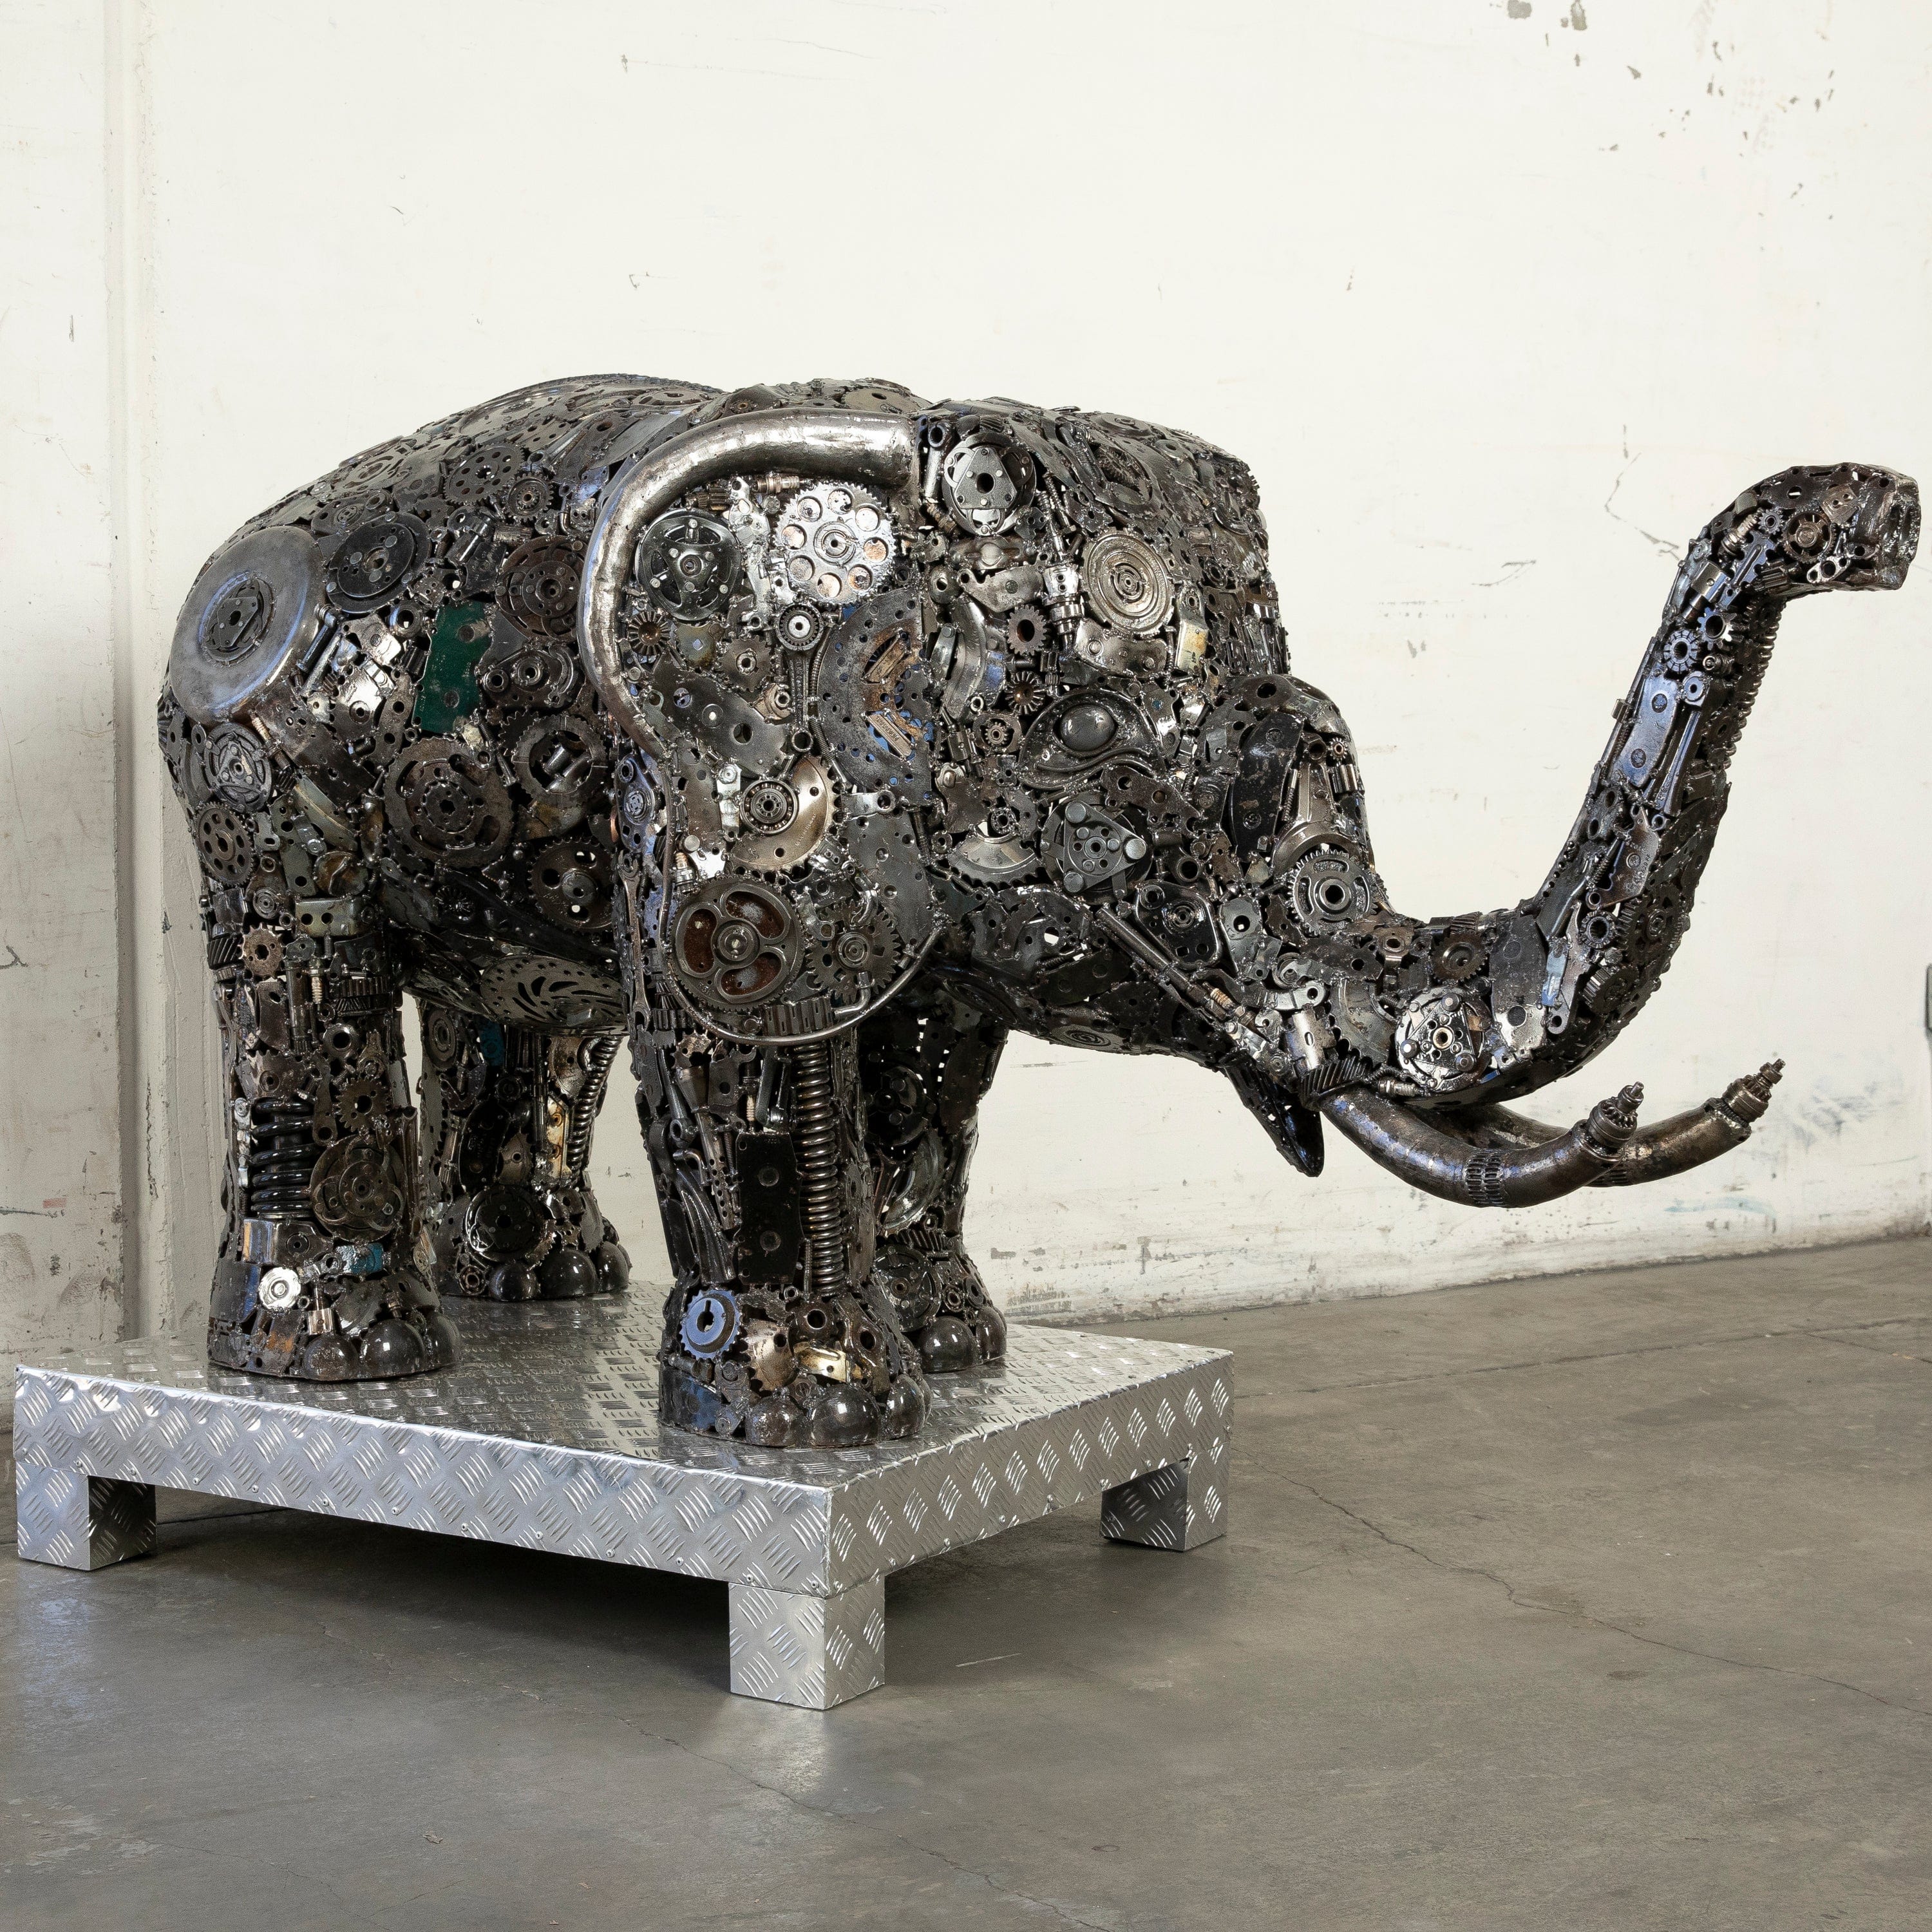 Kalifano Recycled Metal Art 60" Elephant Inspired Recycled Metal Sculpture RMS-ELE150-N